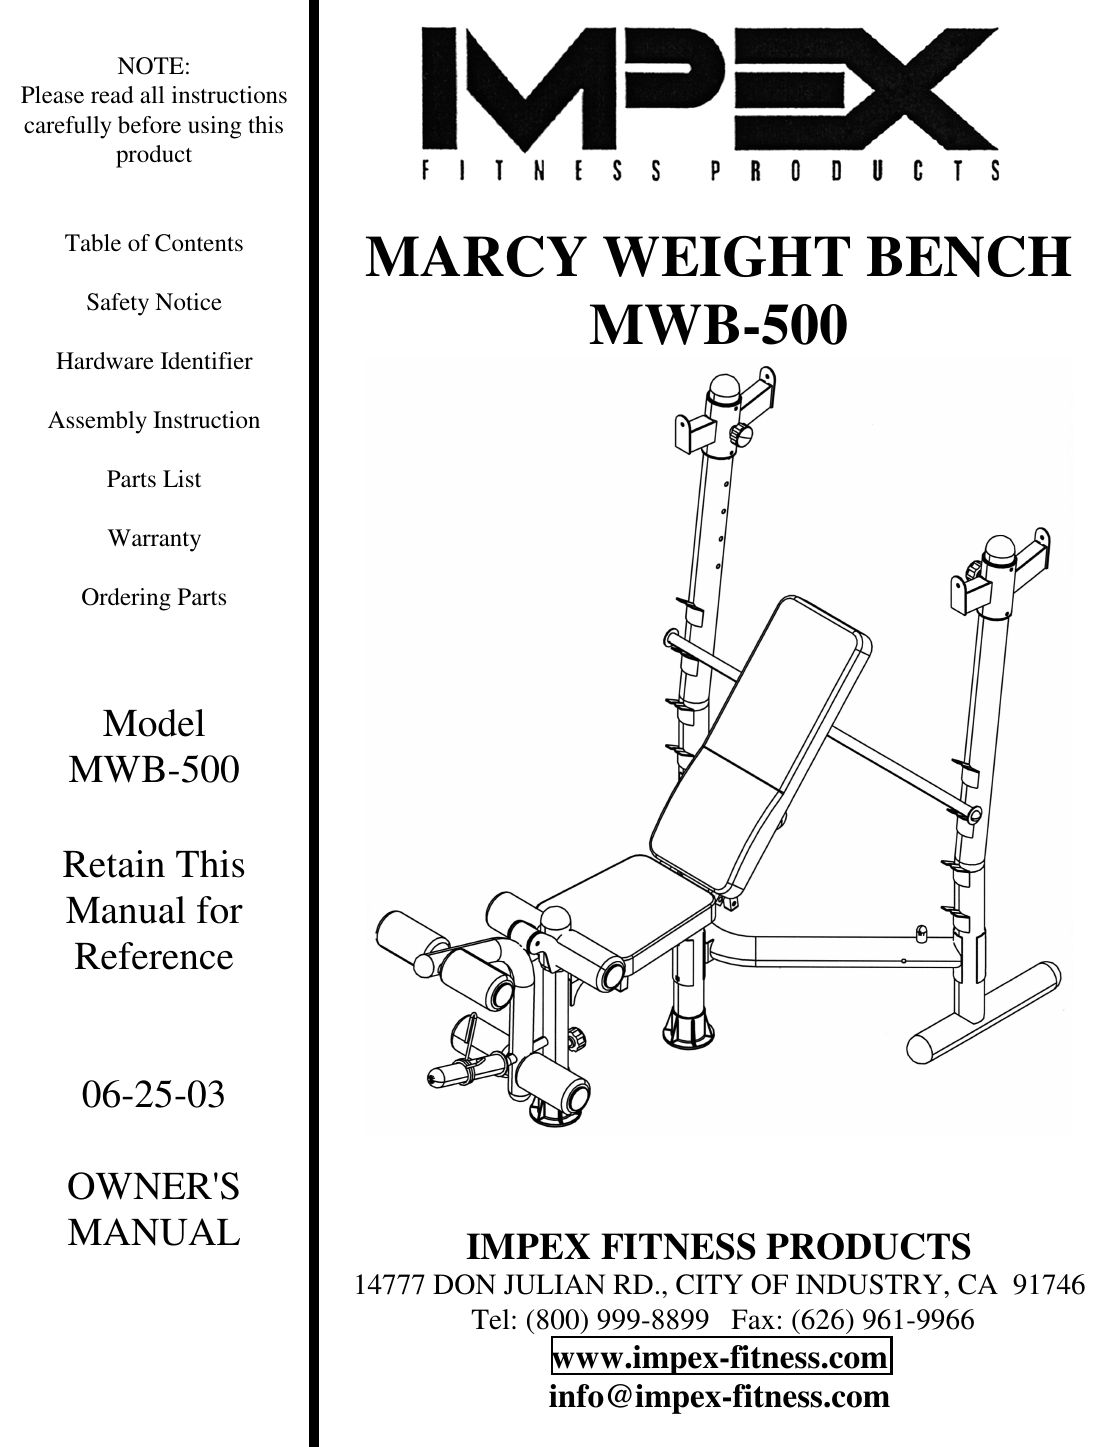 Impex Fitness Mwb 500 Owners Manual Parts List